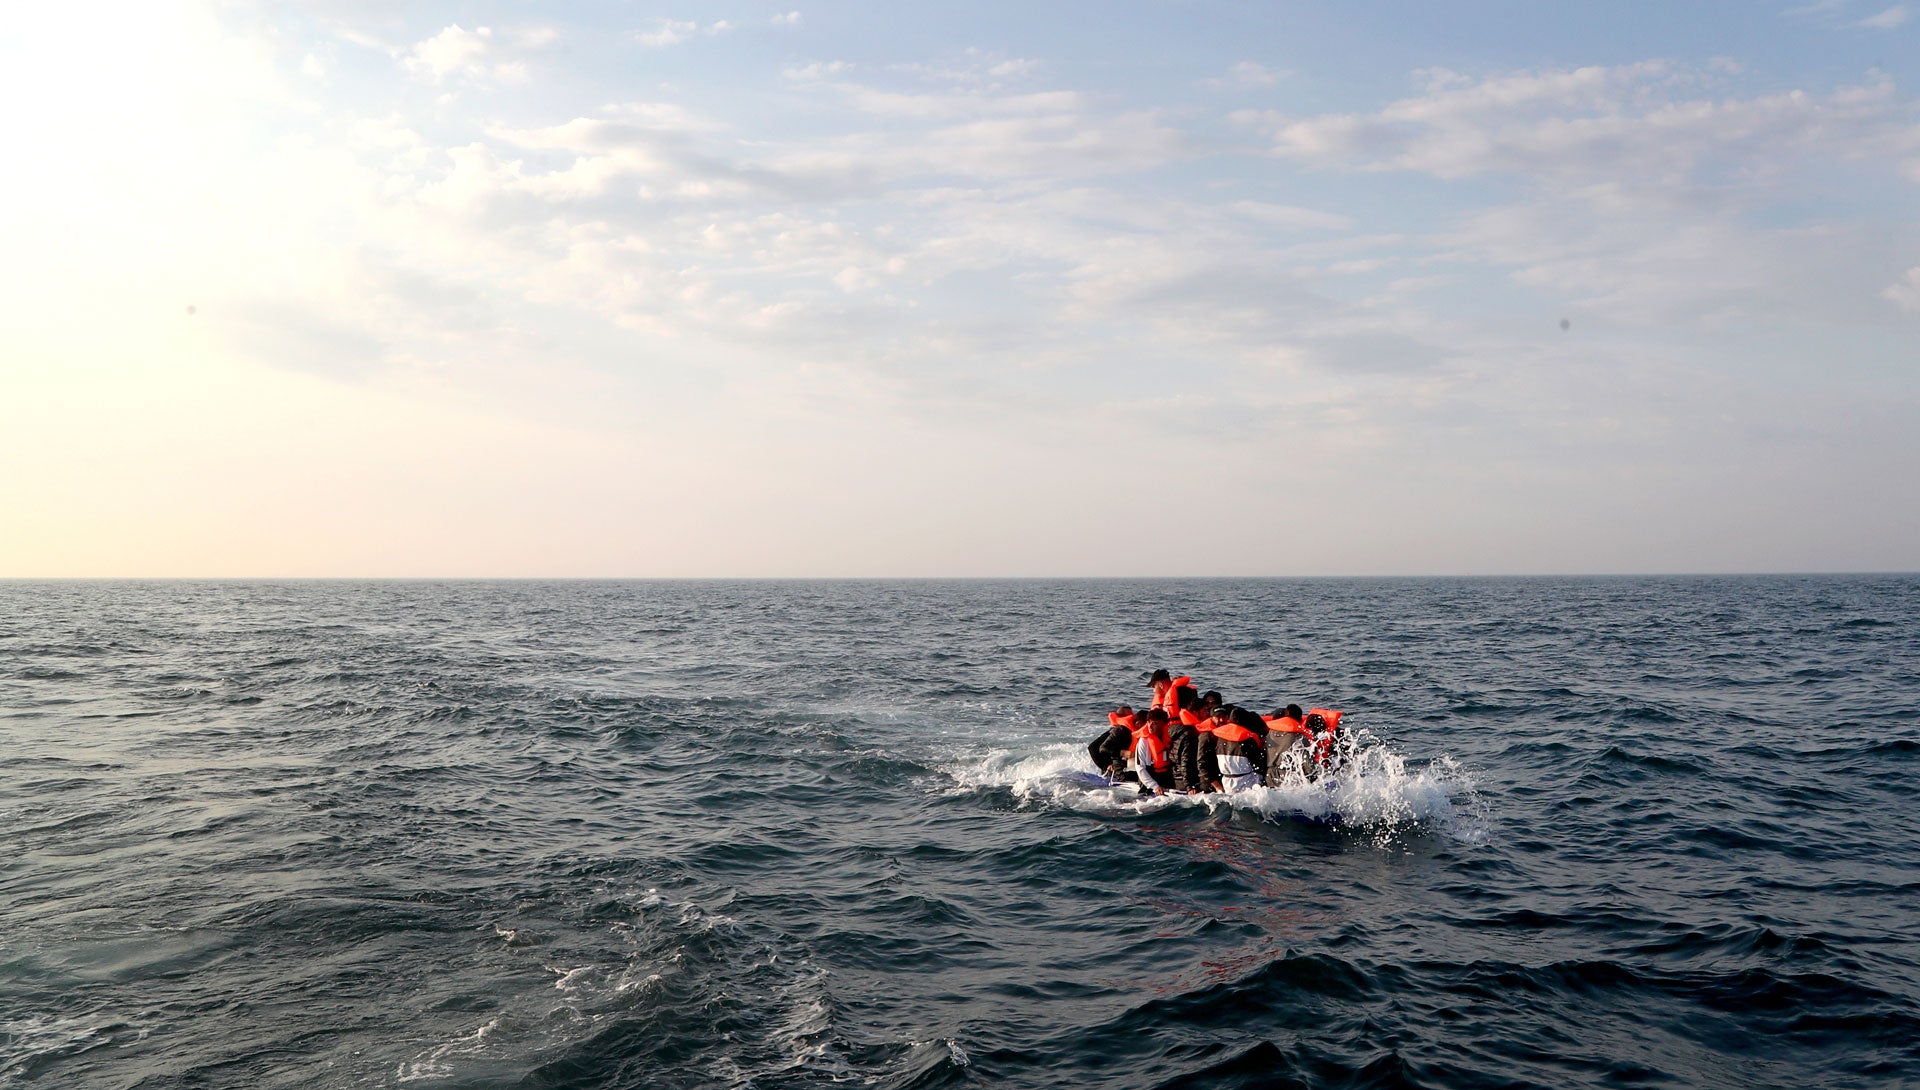 A group of people thought to be migrants crossing the Channel in a small boat headed in the direction of Dover, Kent, United Kingdom, August 10, 2020.